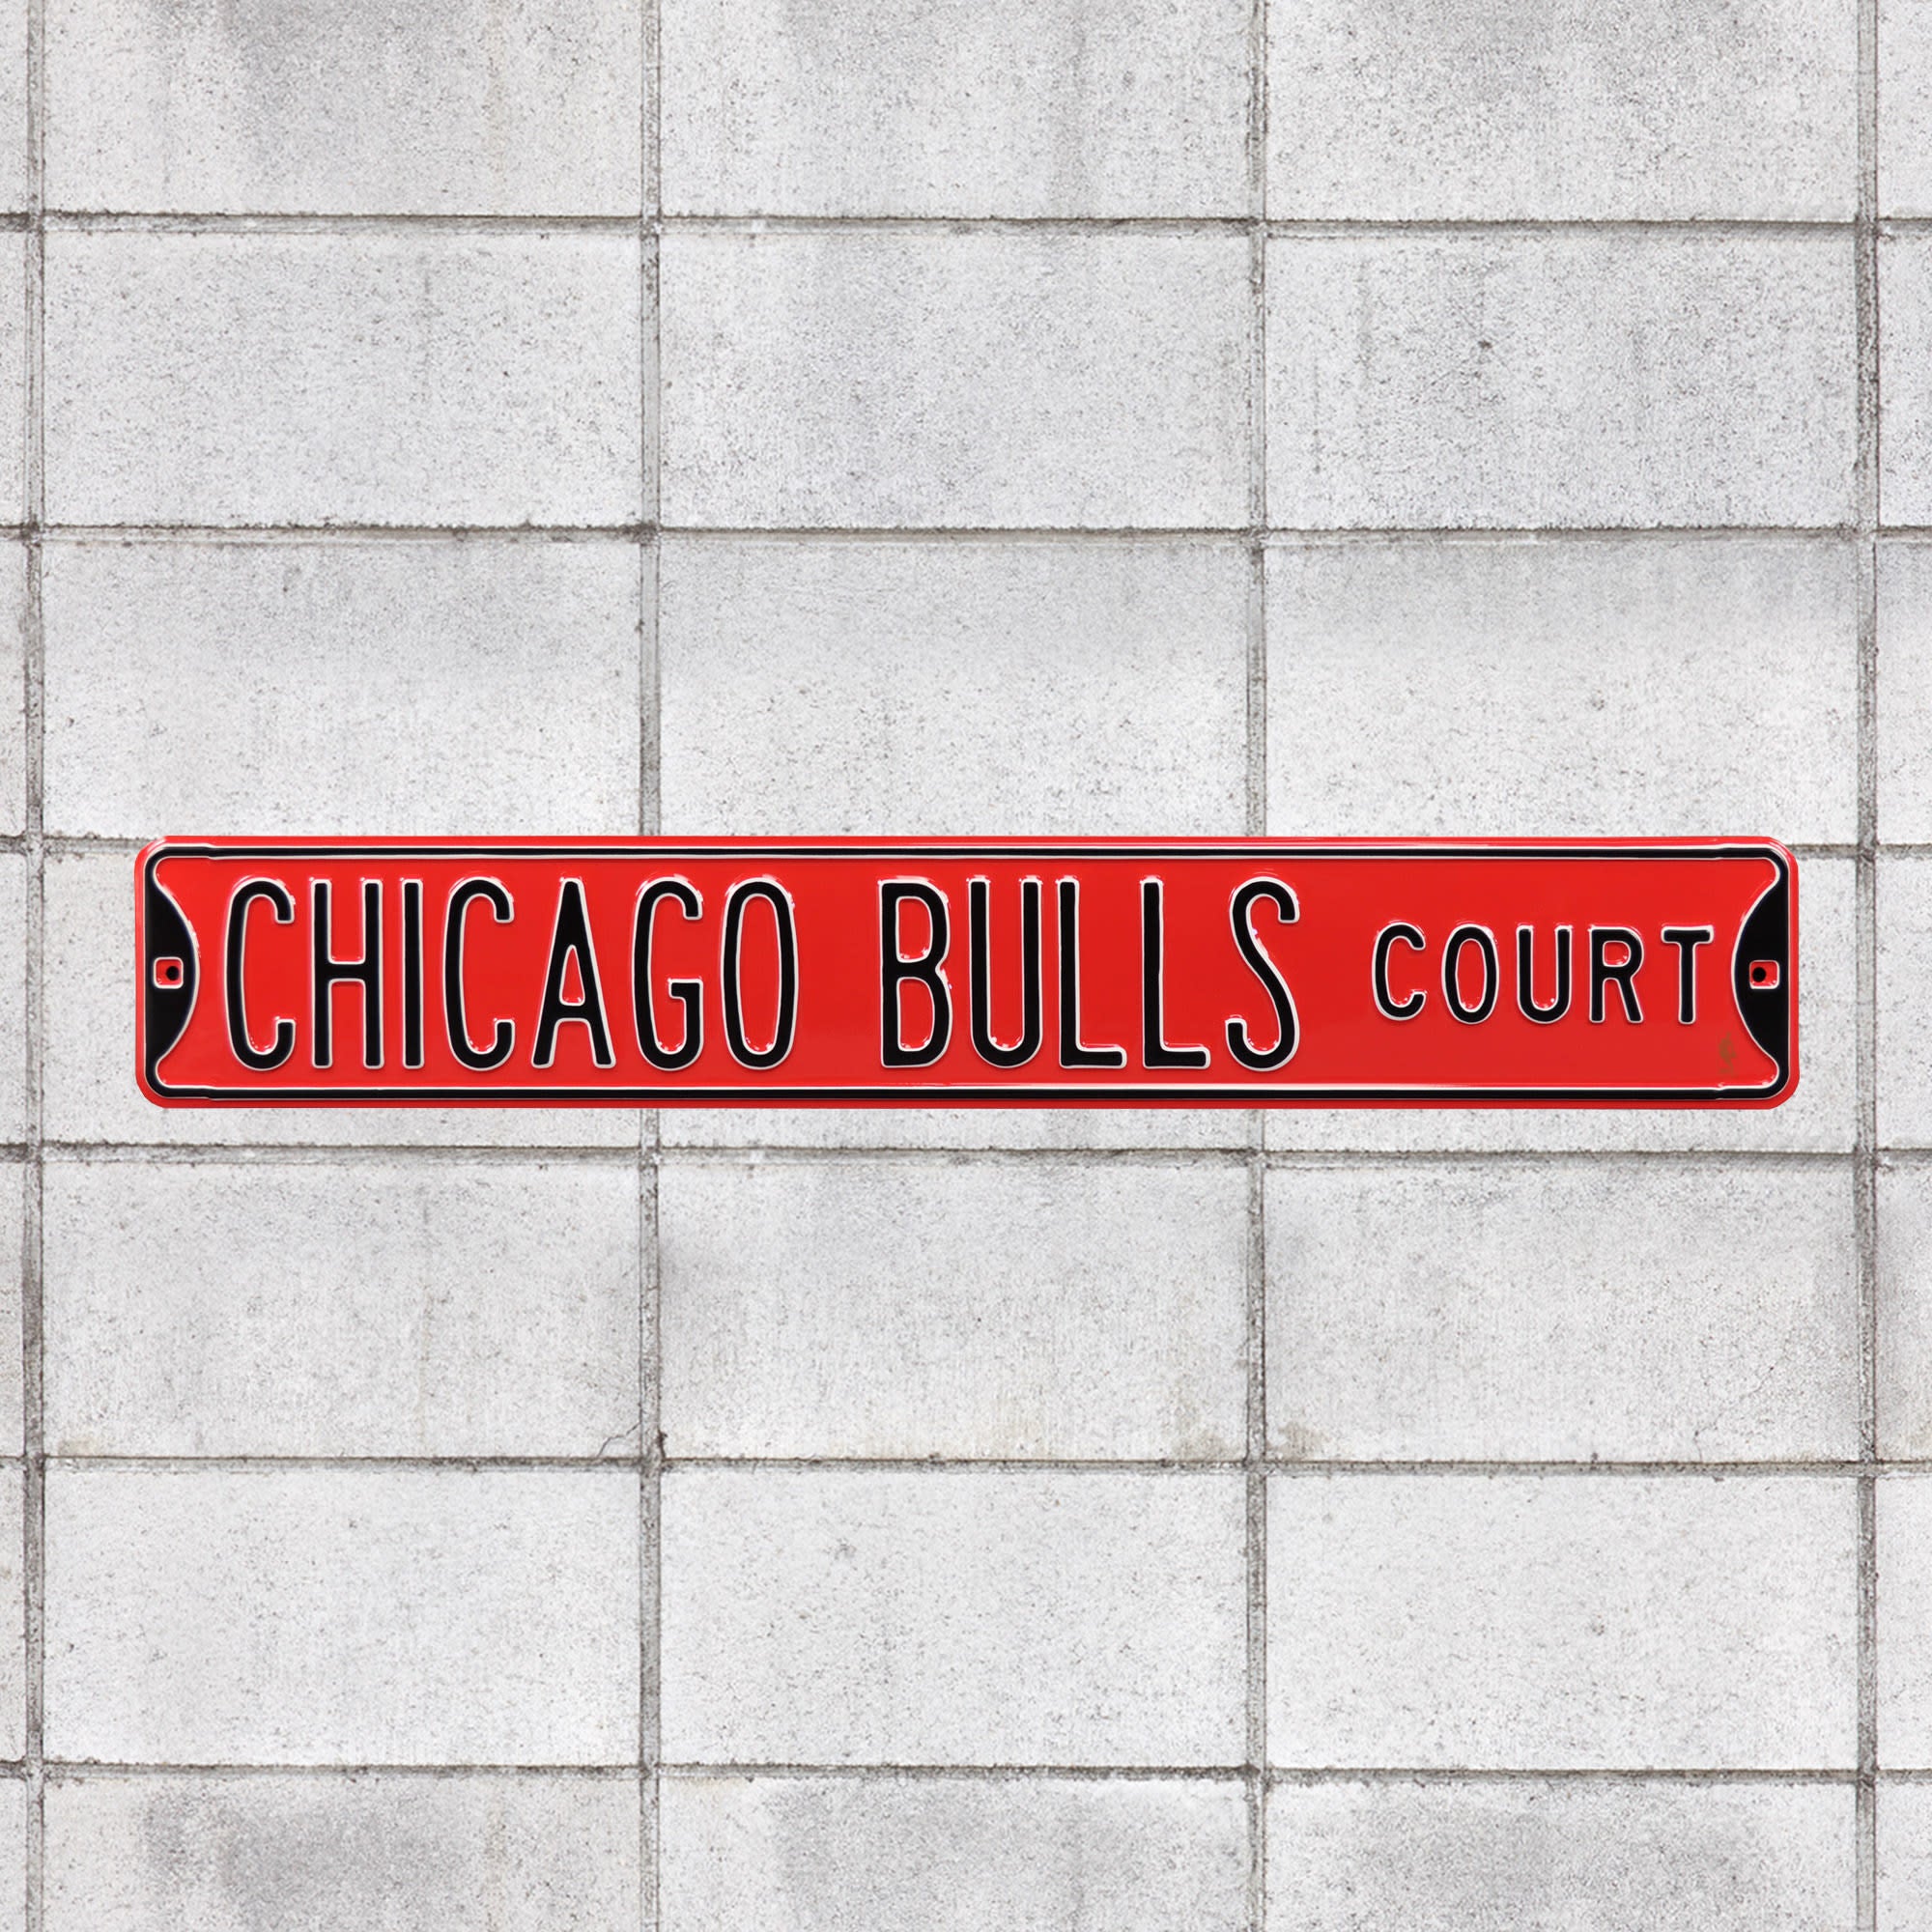 Chicago Bulls: Court - Officially Licensed NBA Metal Street Sign 36.0"W x 6.0"H by Fathead | 100% Steel